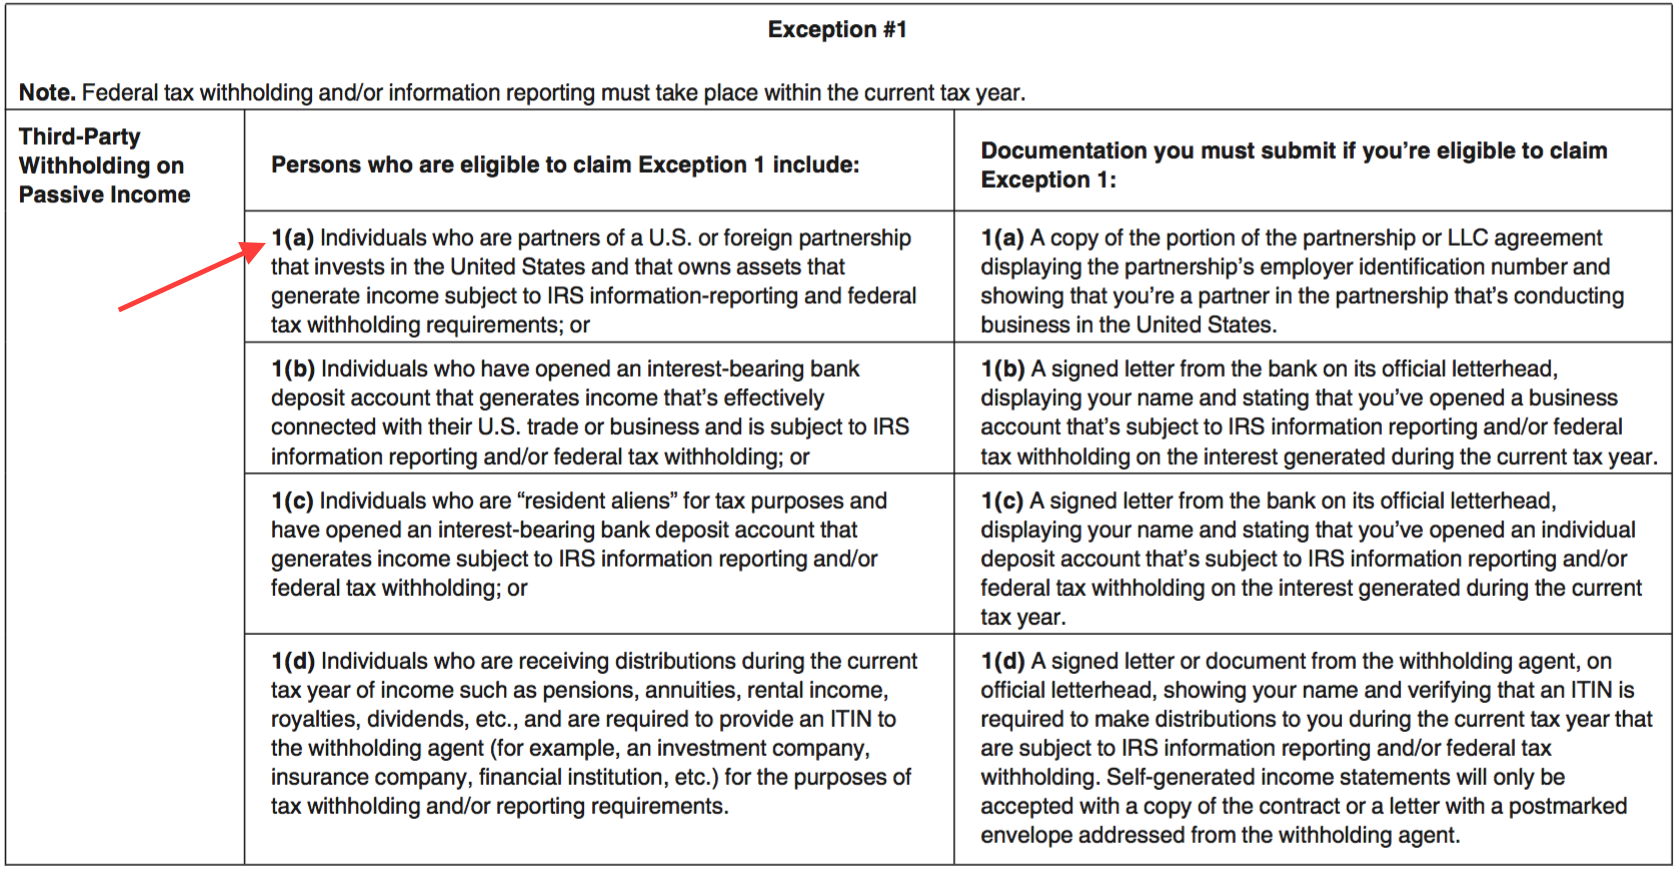 Exception 1a-Partnership Income